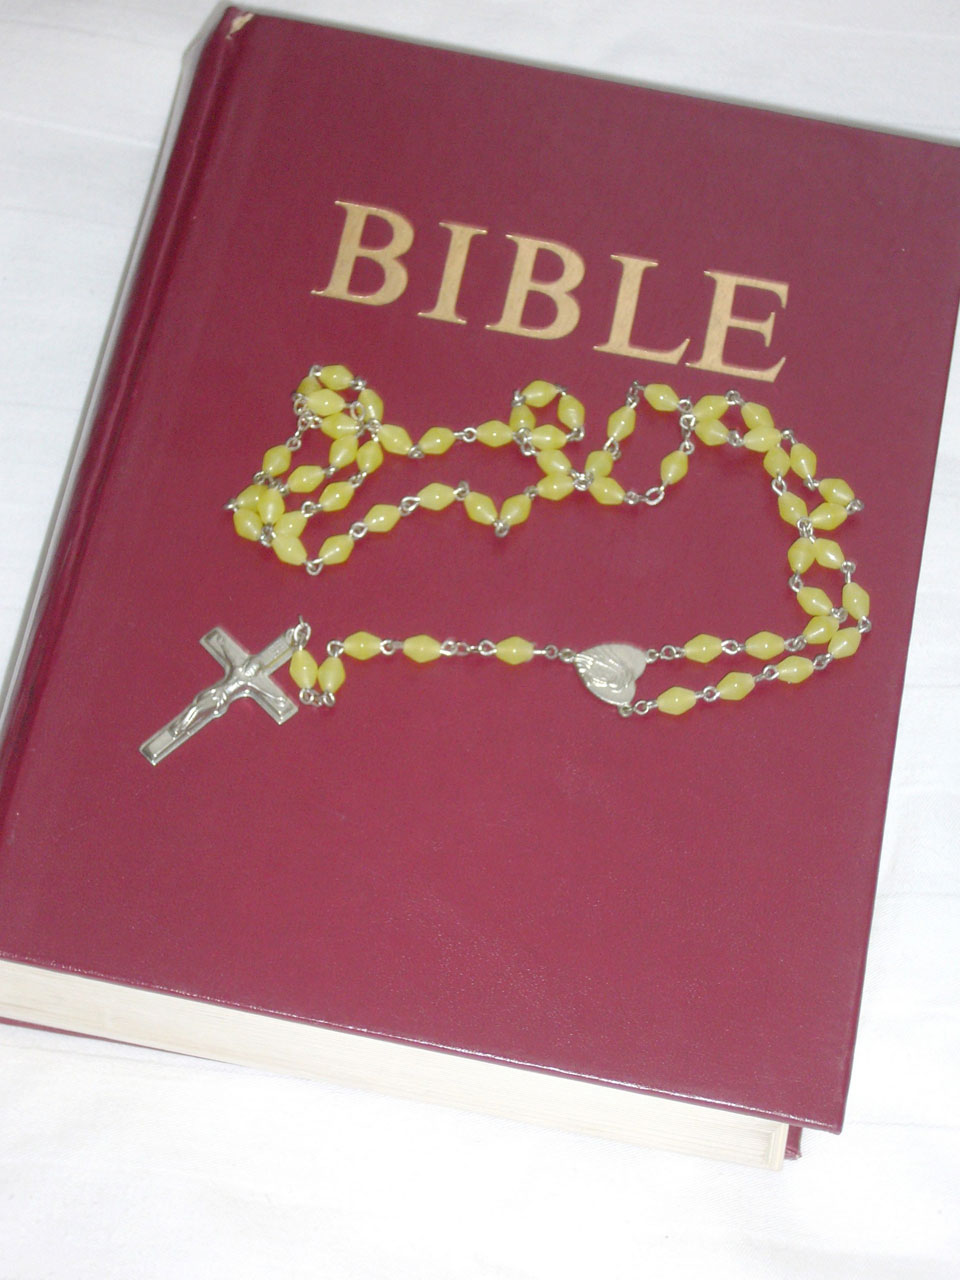 bible rosary book free photo